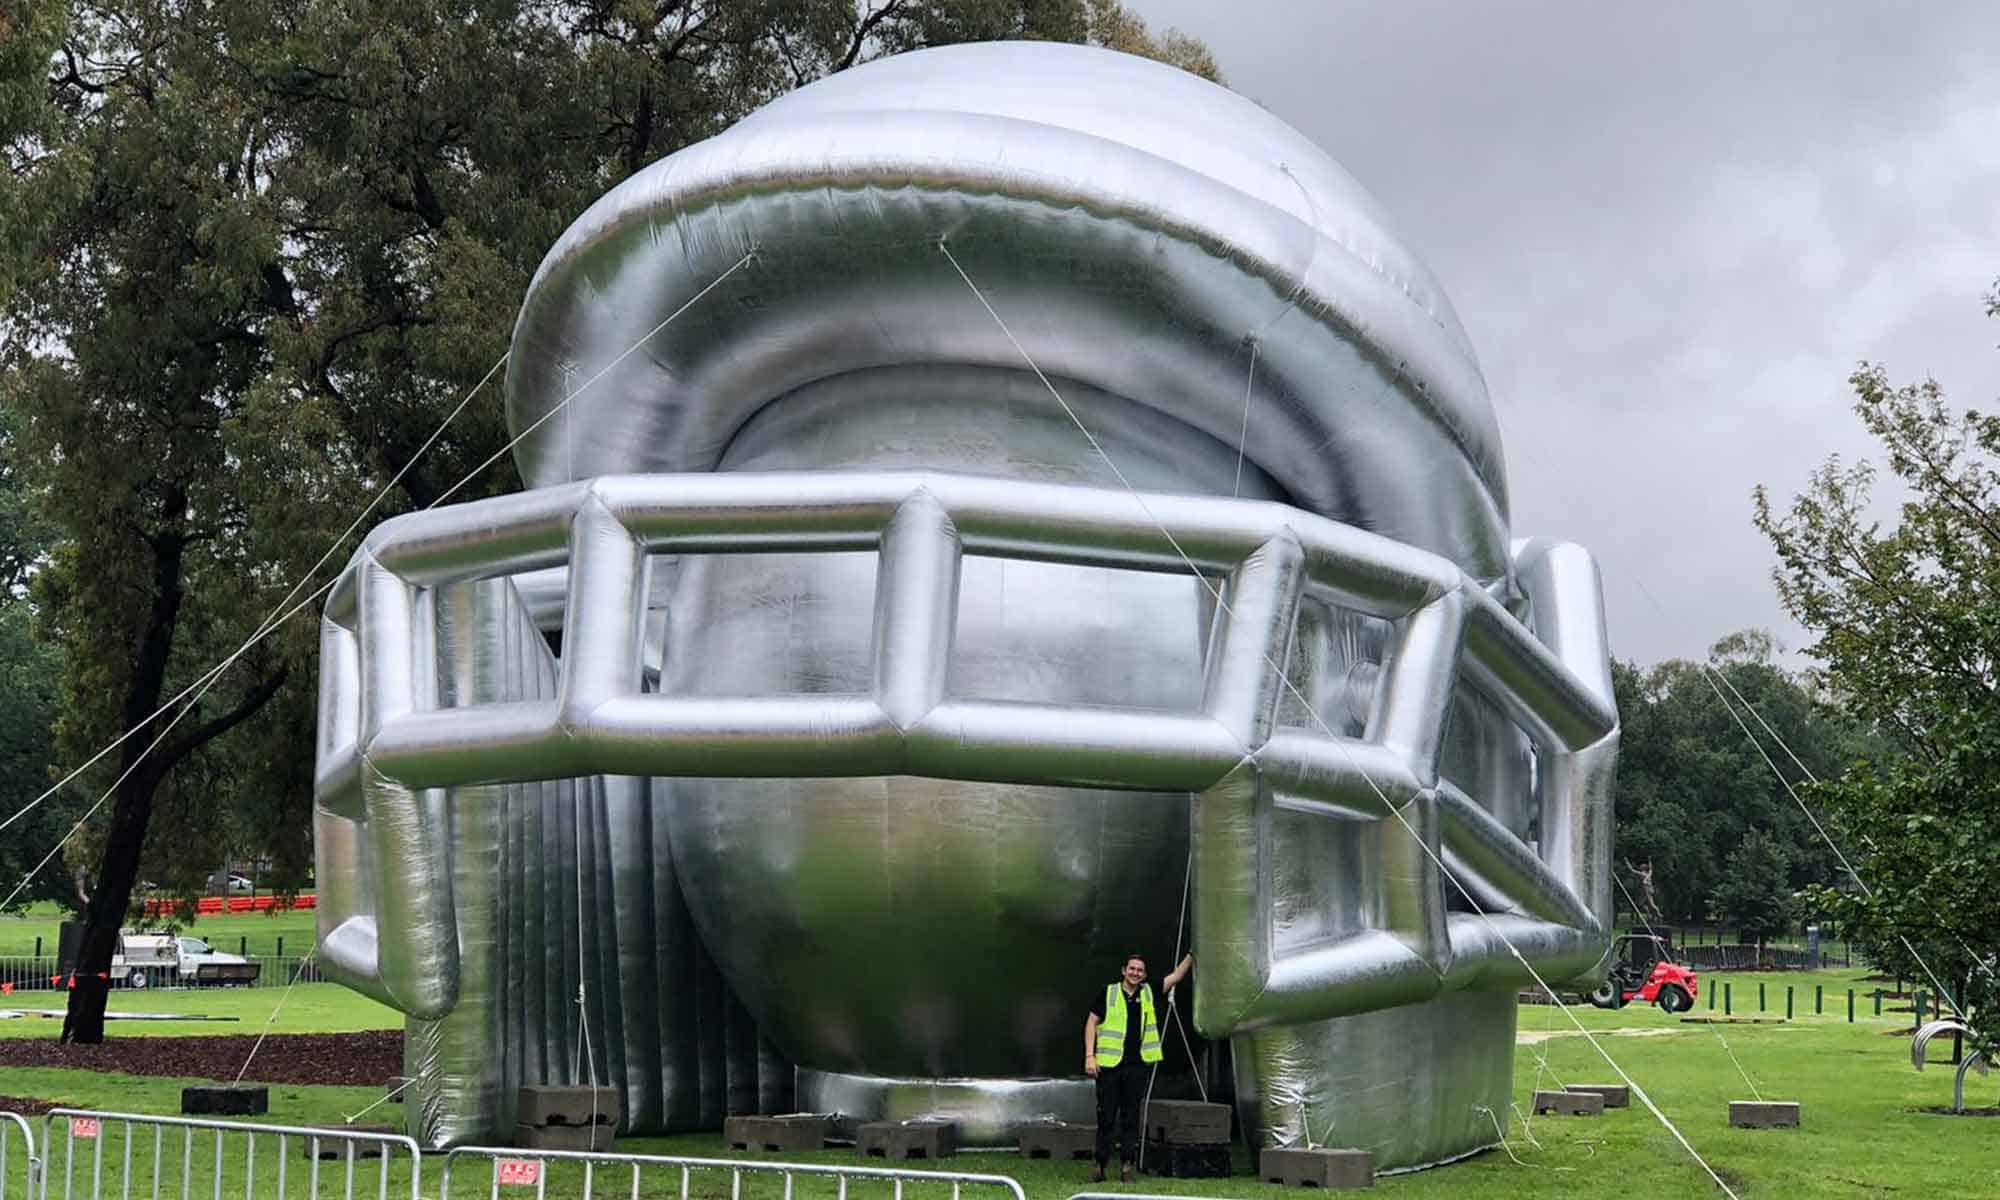 The inflatable was tall and visible enough to stand out from the surrounding area and draw the general public to the event, increasing public attendance on the park grounds.